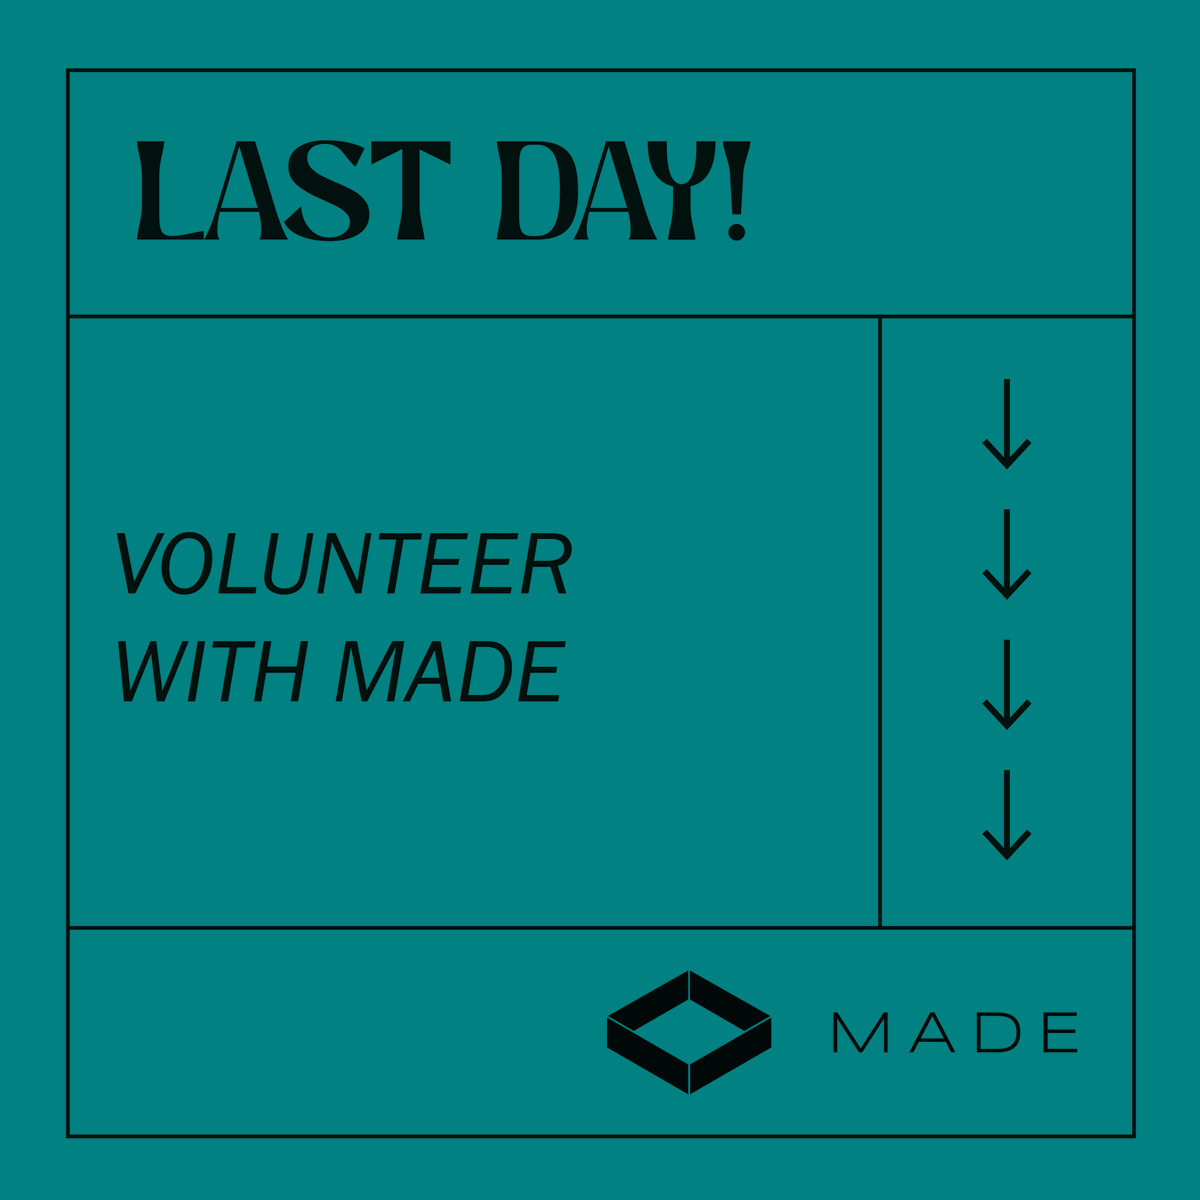 Today is the last day to apply for two of our board positions! Find out more at joinmade.org/opportunities. If you’re interested, please send a short blurb about why you would like to join the board to info@joinmade.org by 11:59pm tonight. #YegDesign #YegArchitecture